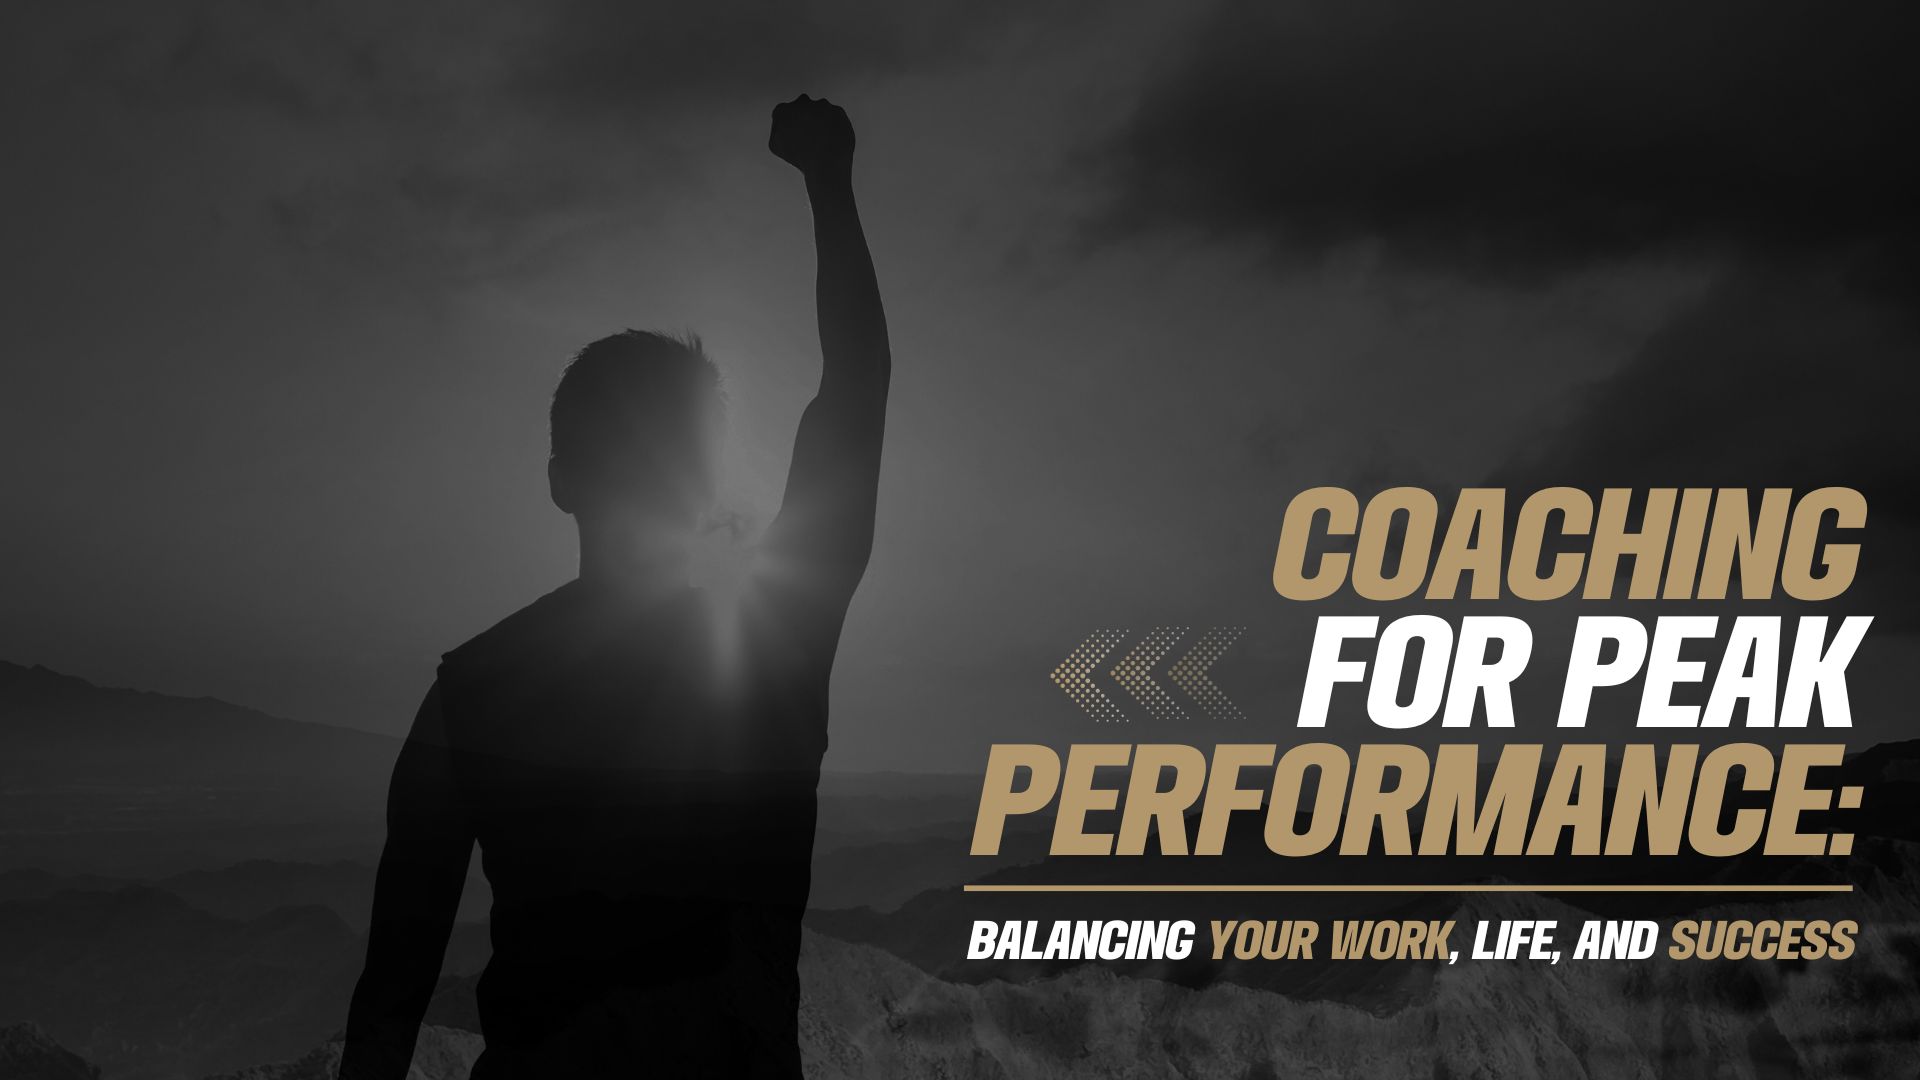 Coaching for Peak Performance: Balancing Your Work, Life, and Success